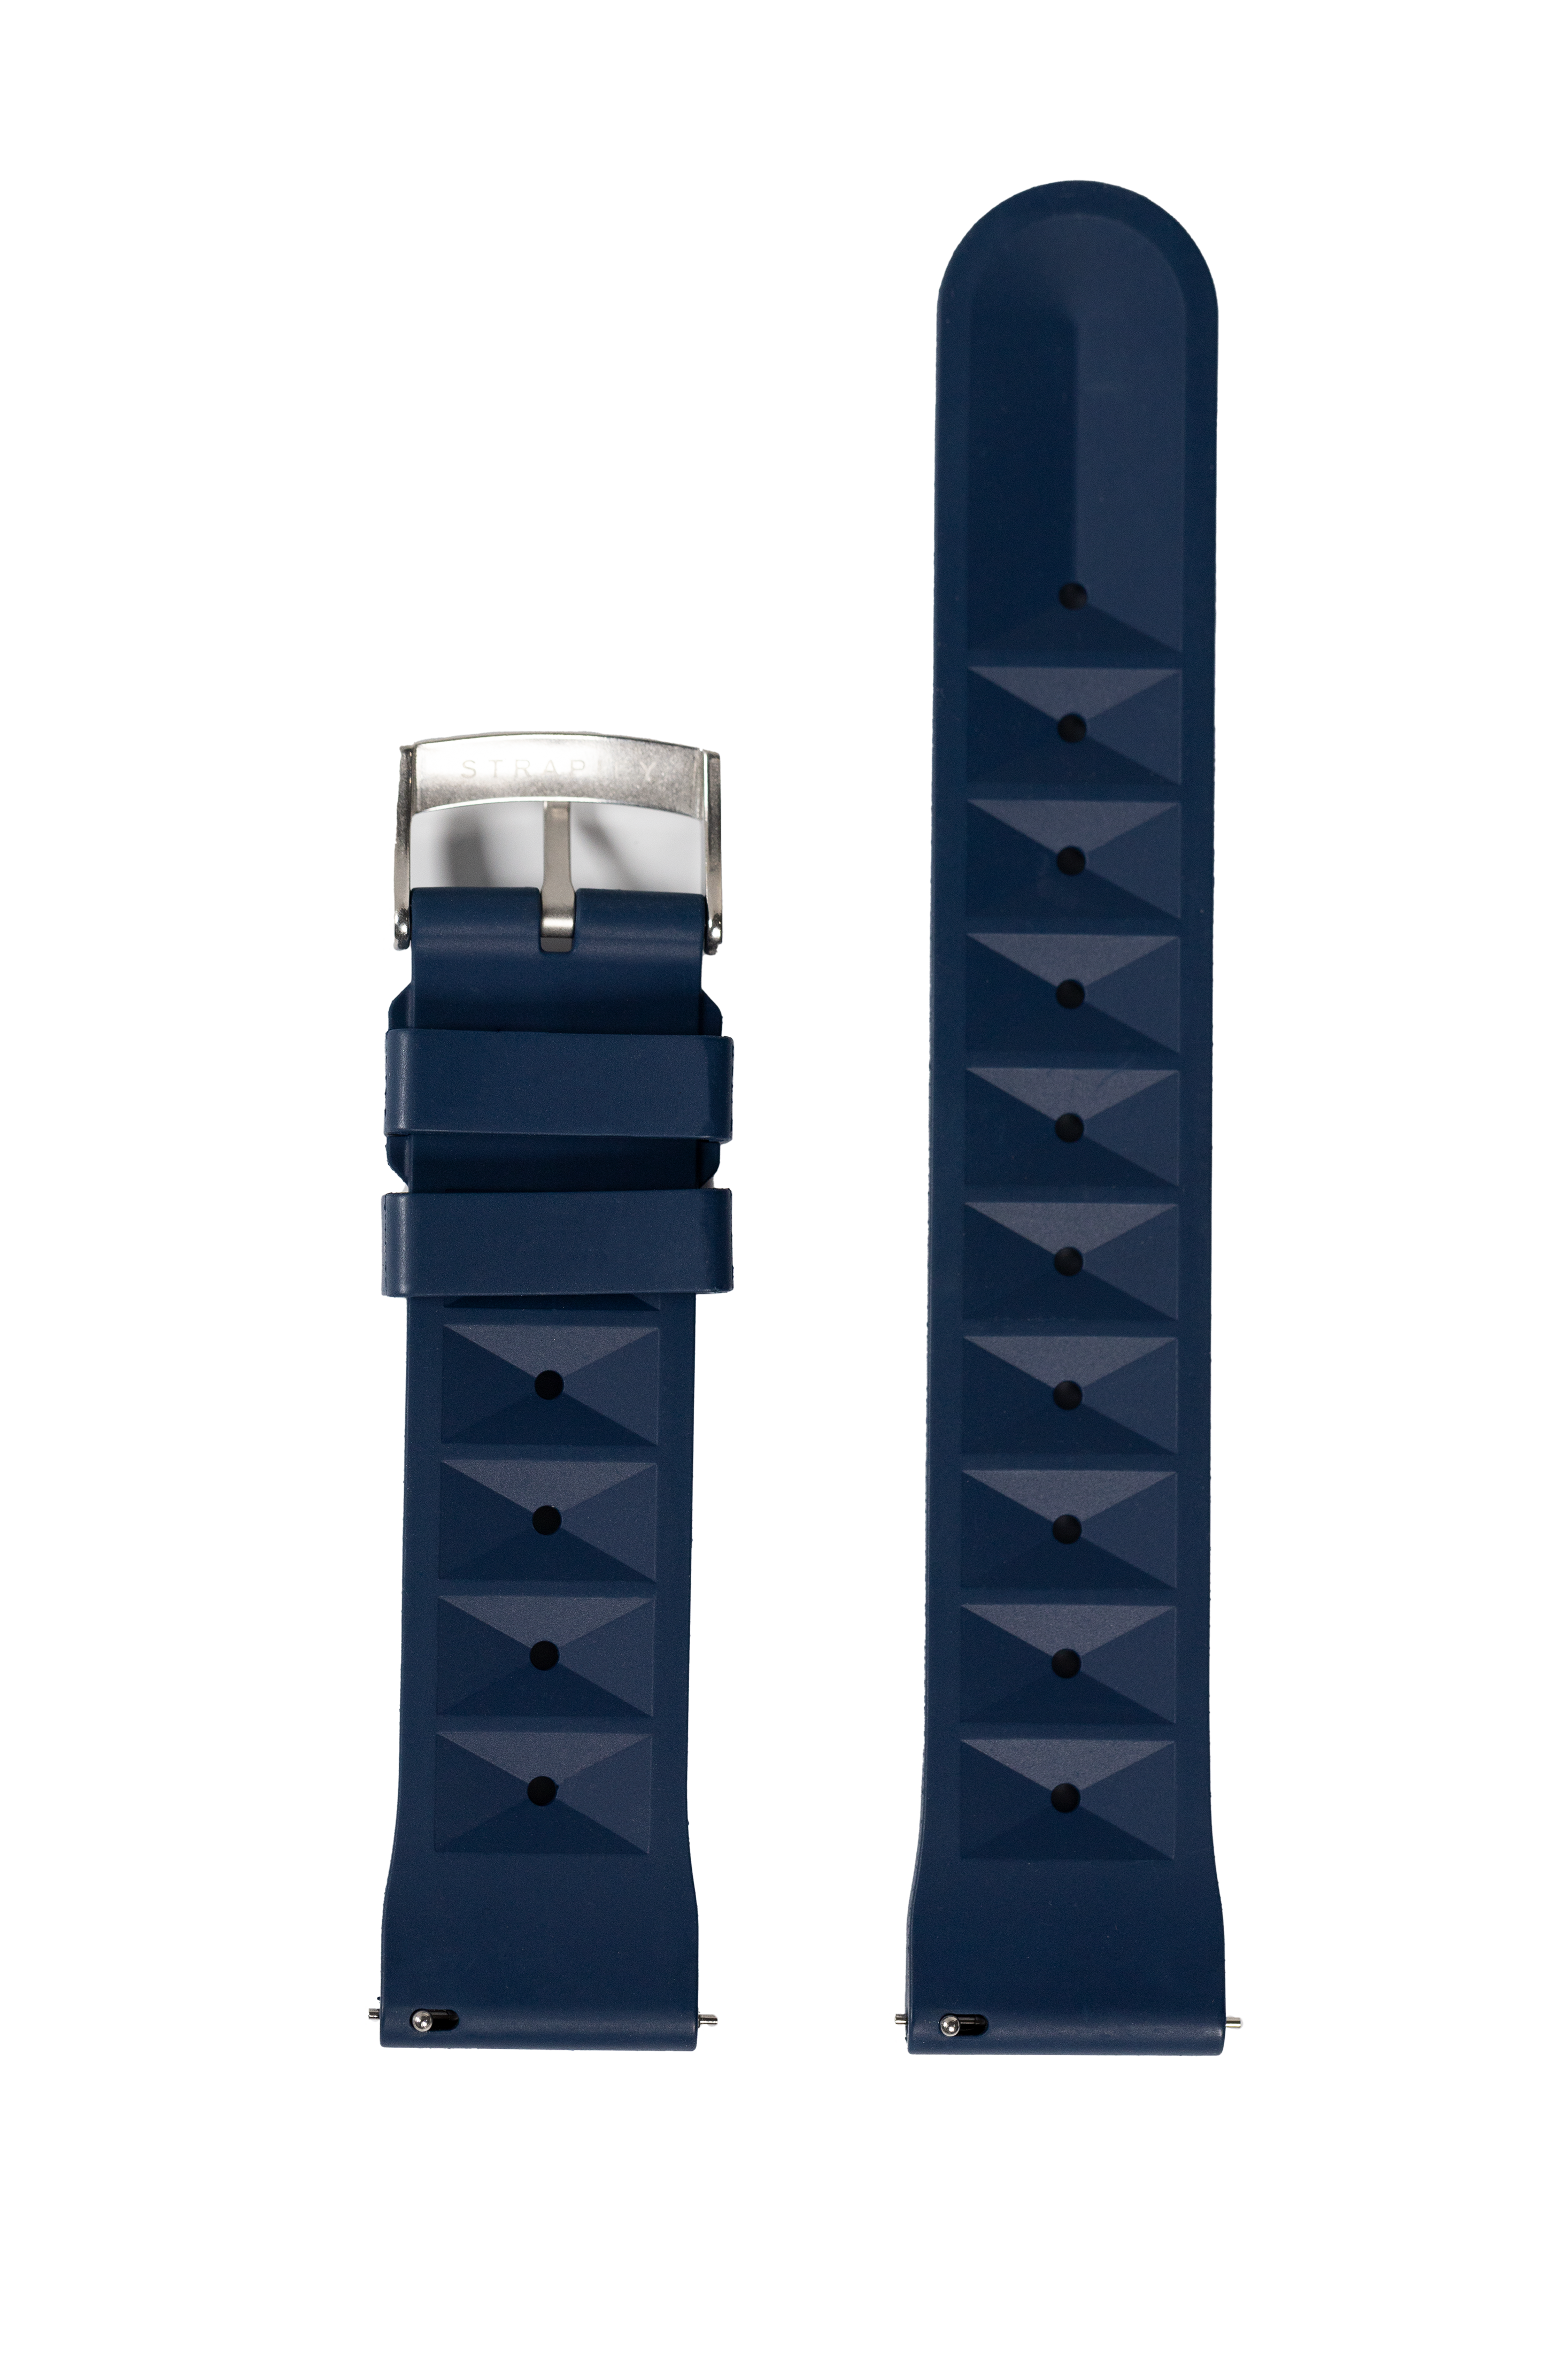 [Quick Release] King Waffle FKM Rubber - Navy Blue